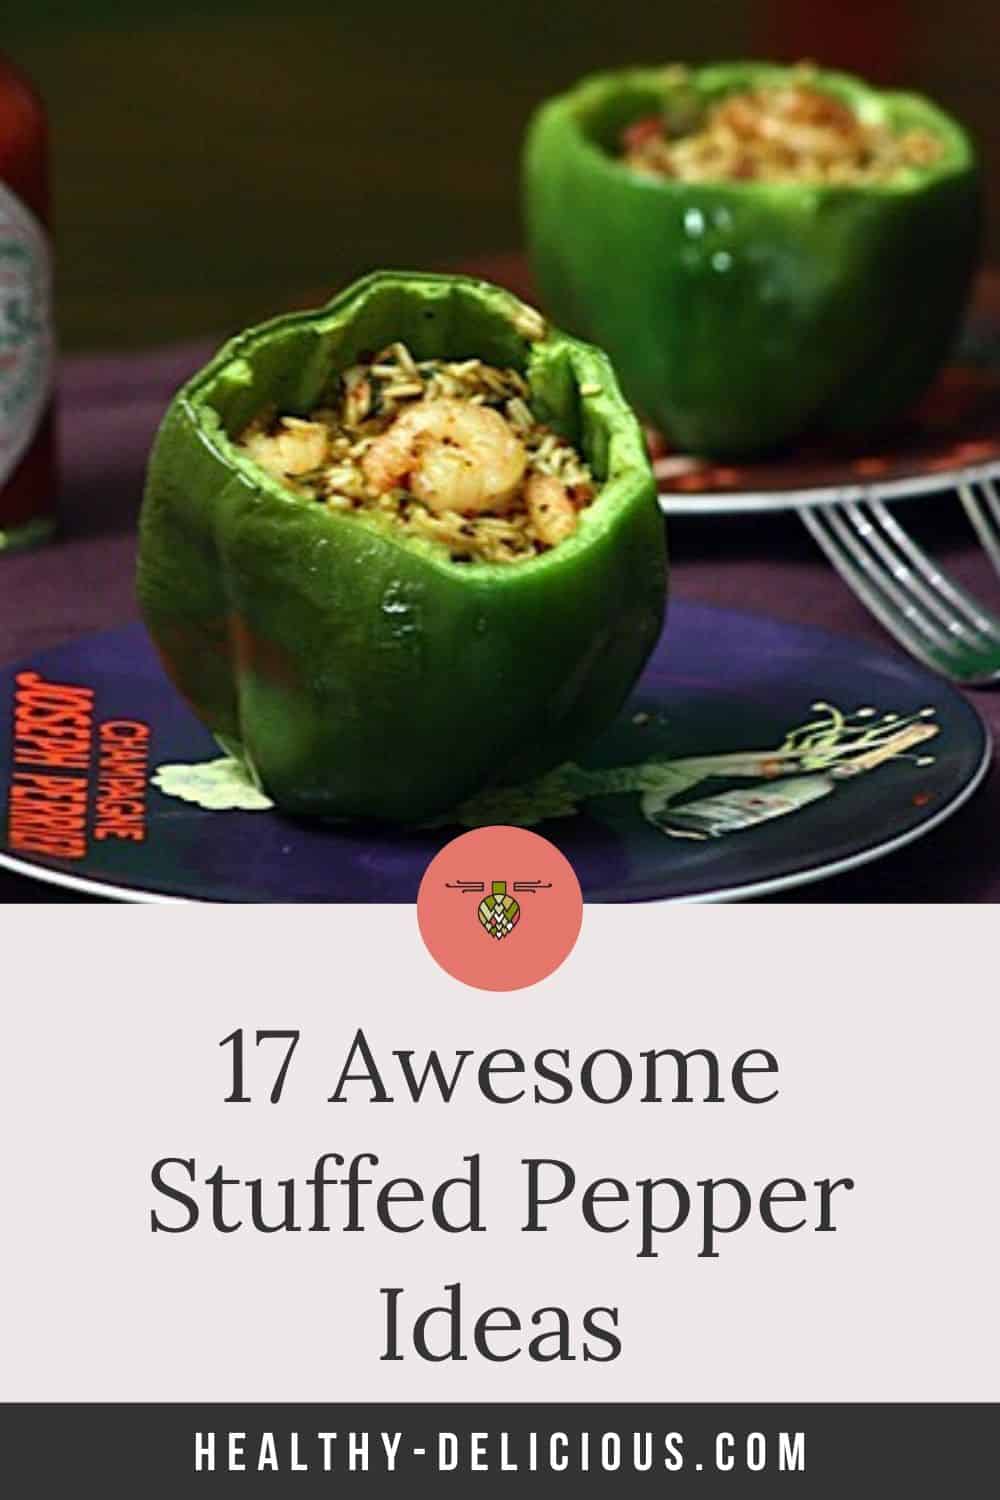 17 healthy stuffed peppers recipes, from classic Italian stuffed peppers to enchilada stuffed peppers to low carb stuffed pepper soup made with cauliflower rice via @HealthyDelish